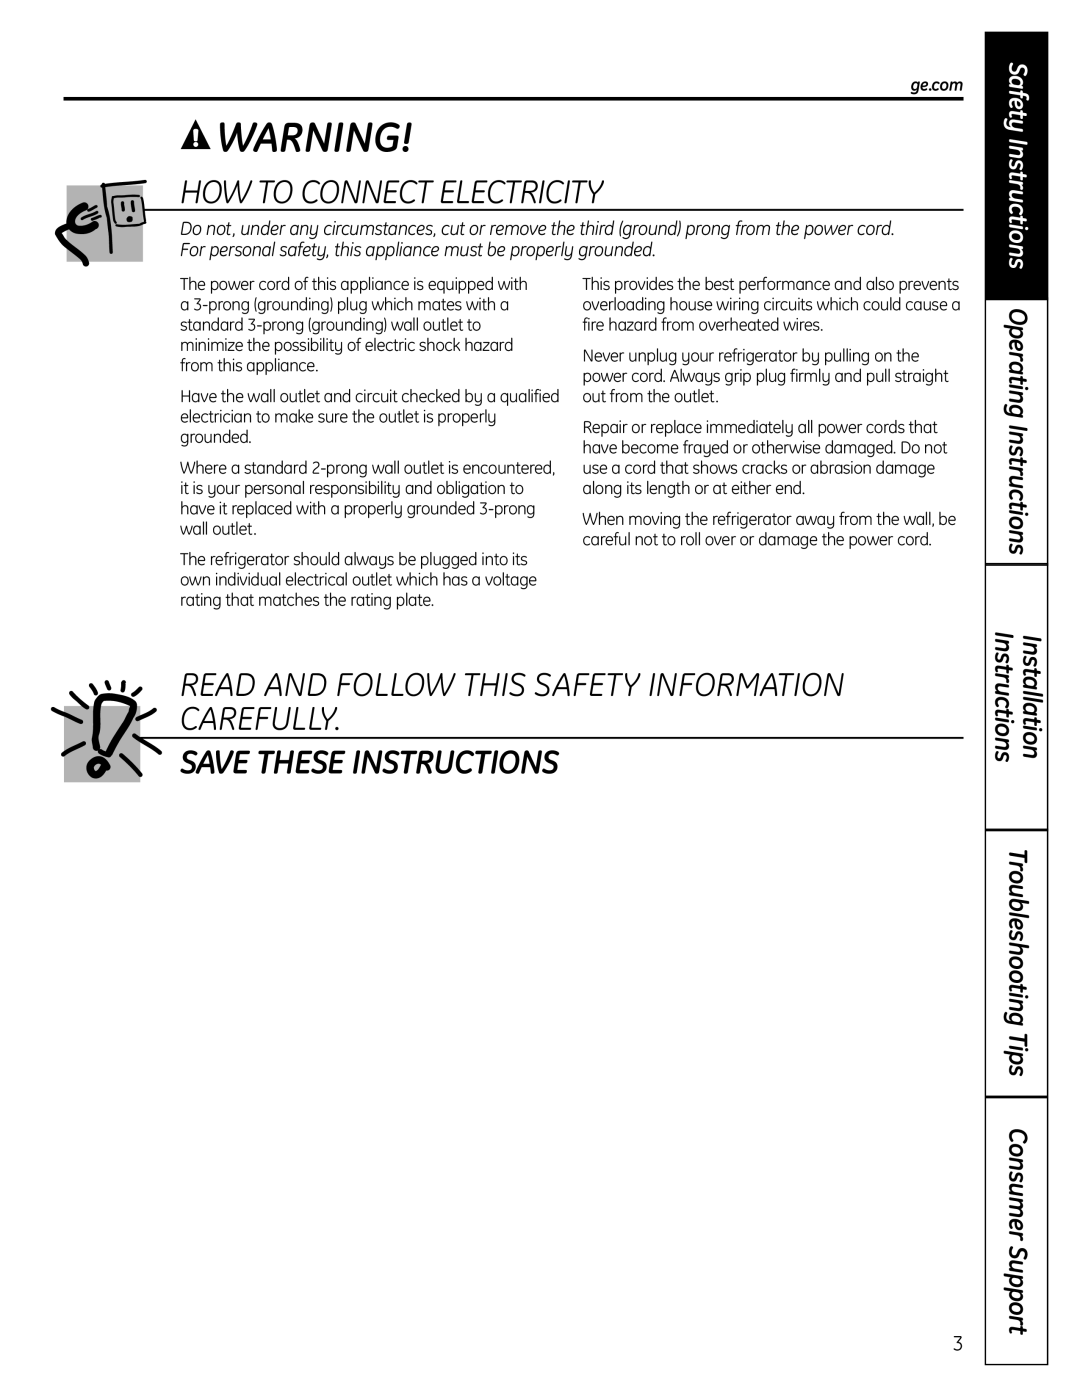 GE 225D1804P001 How To Connect Electricity, Read And Follow This Safety Information Carefully, Save These Instructions 